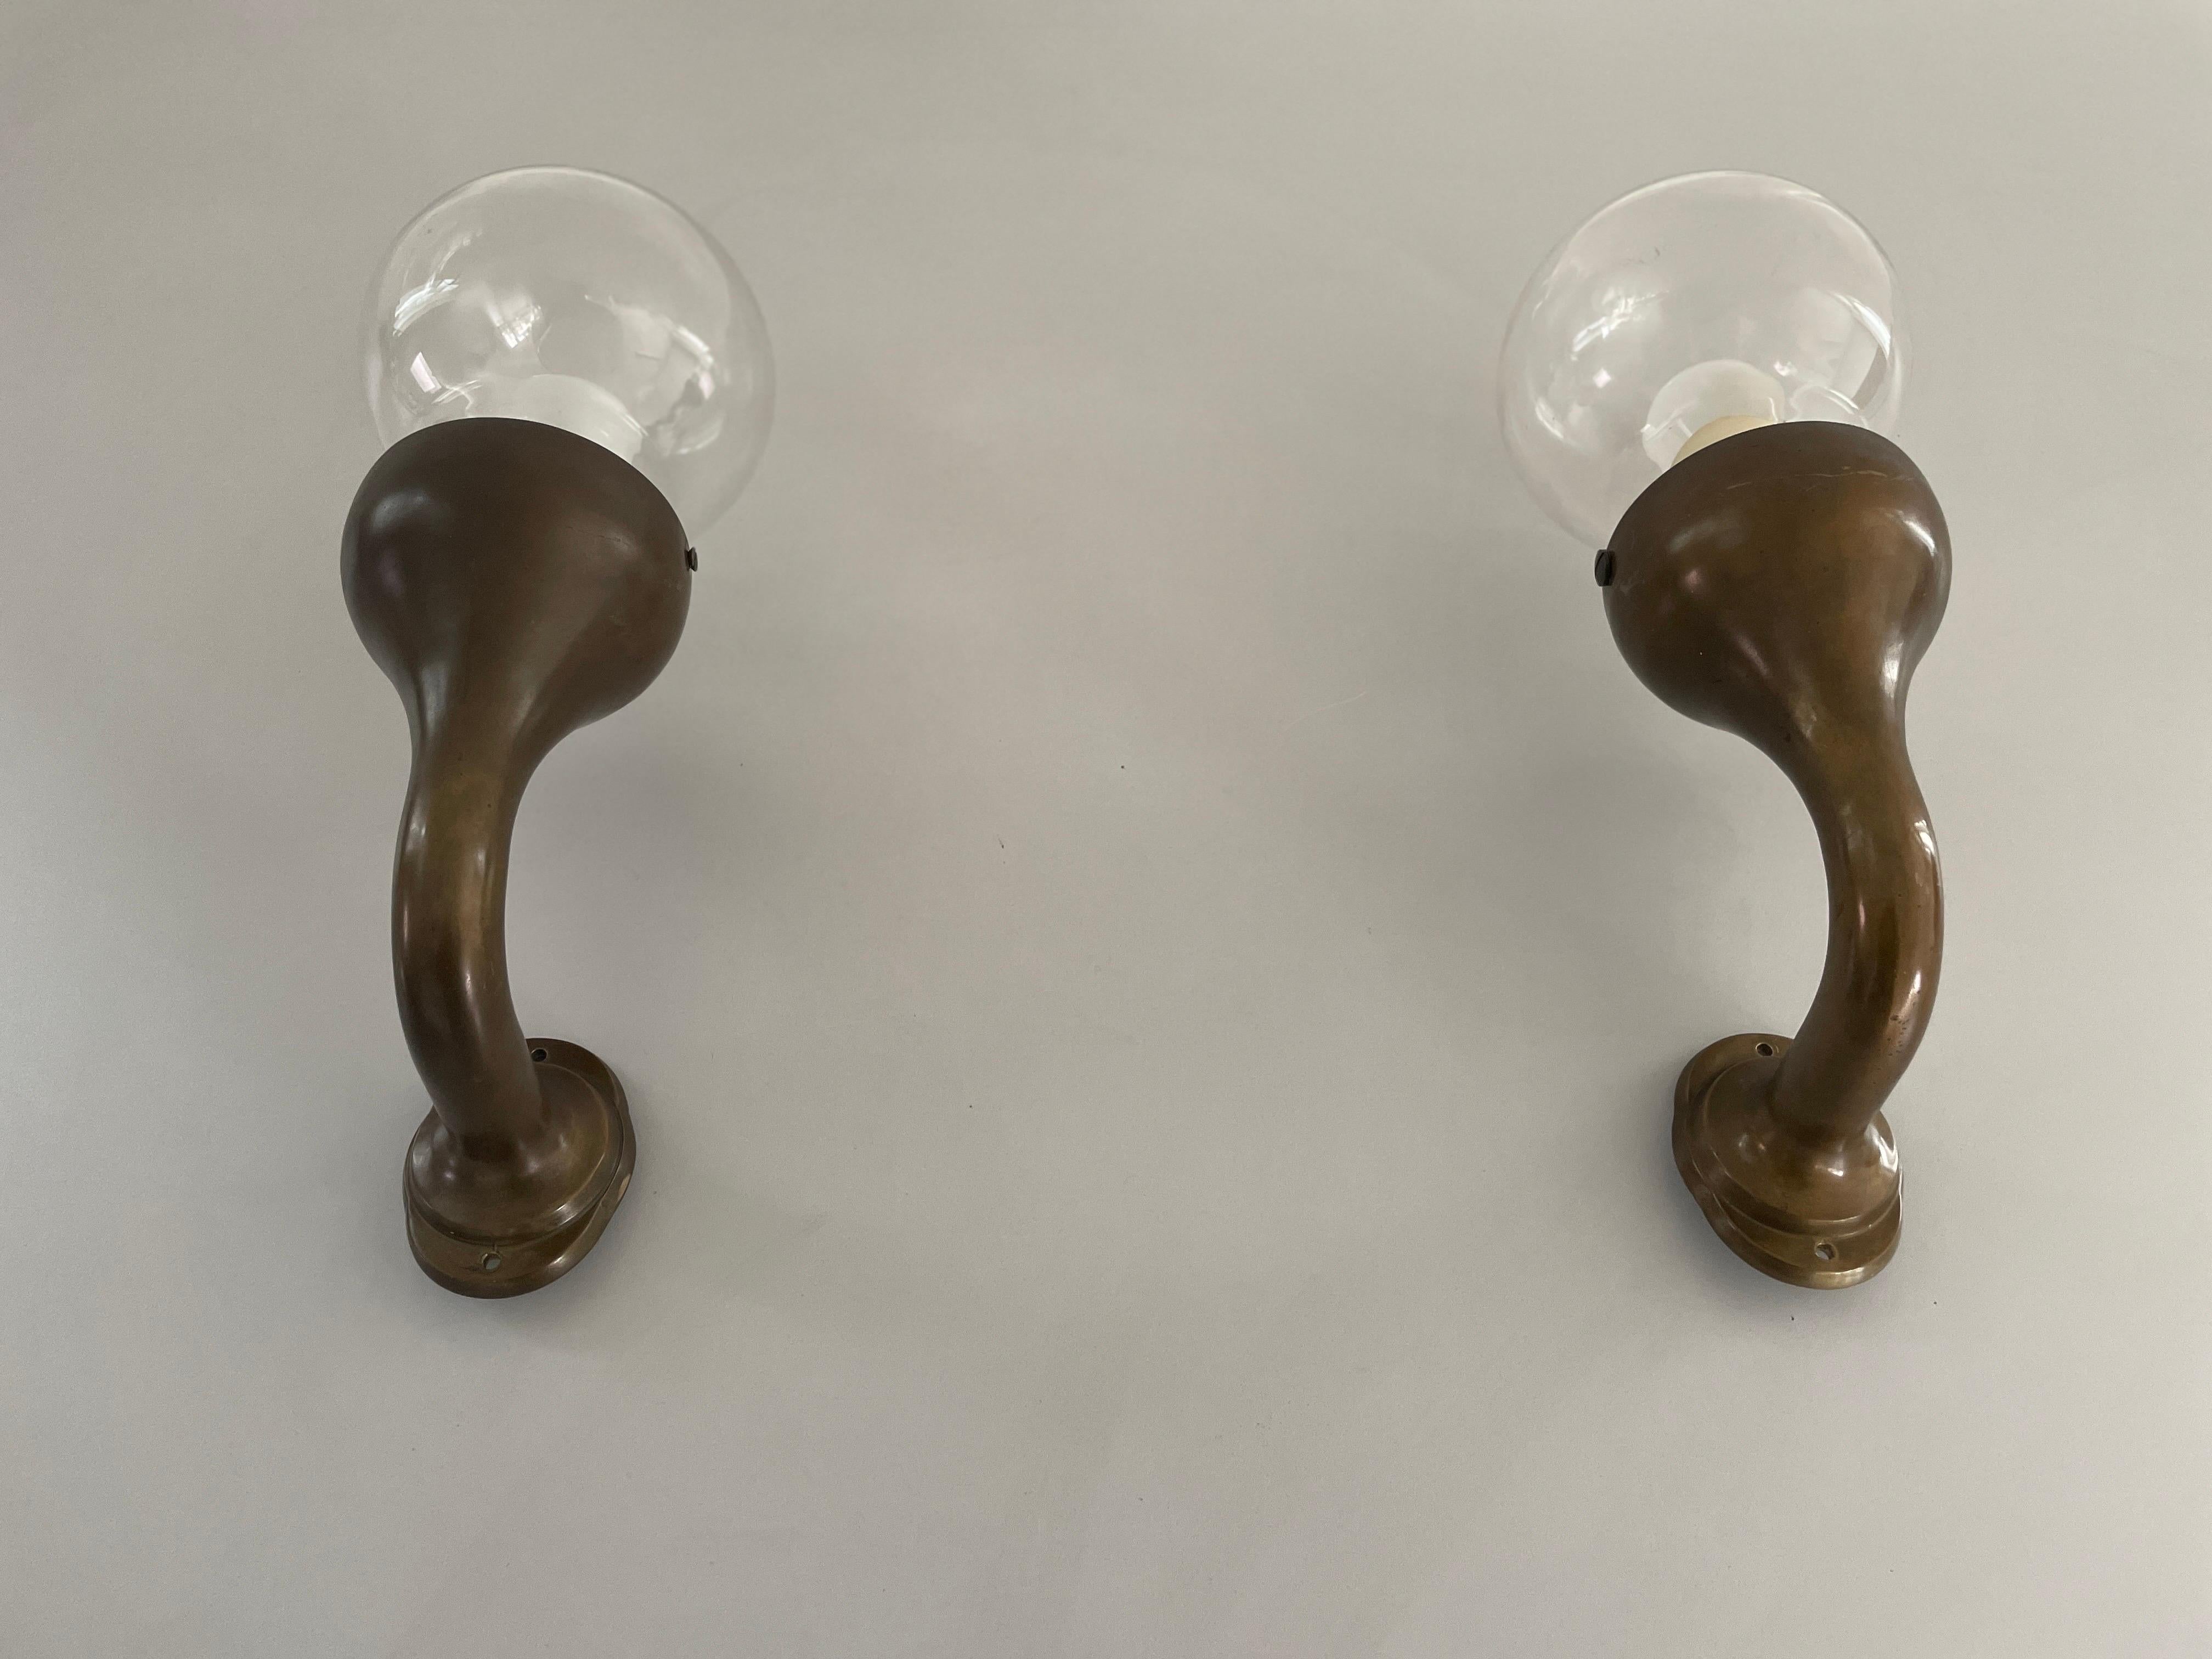 Modernist Glass and Bronze Body Pair of Sconces, 1960s, Italy

Very elegant and Minimalist wall lamps.

Lamps are in excellent condition.

These lamps works with E14 standard light bulbs. 
Wired and suitable to use in all countries. (110-220